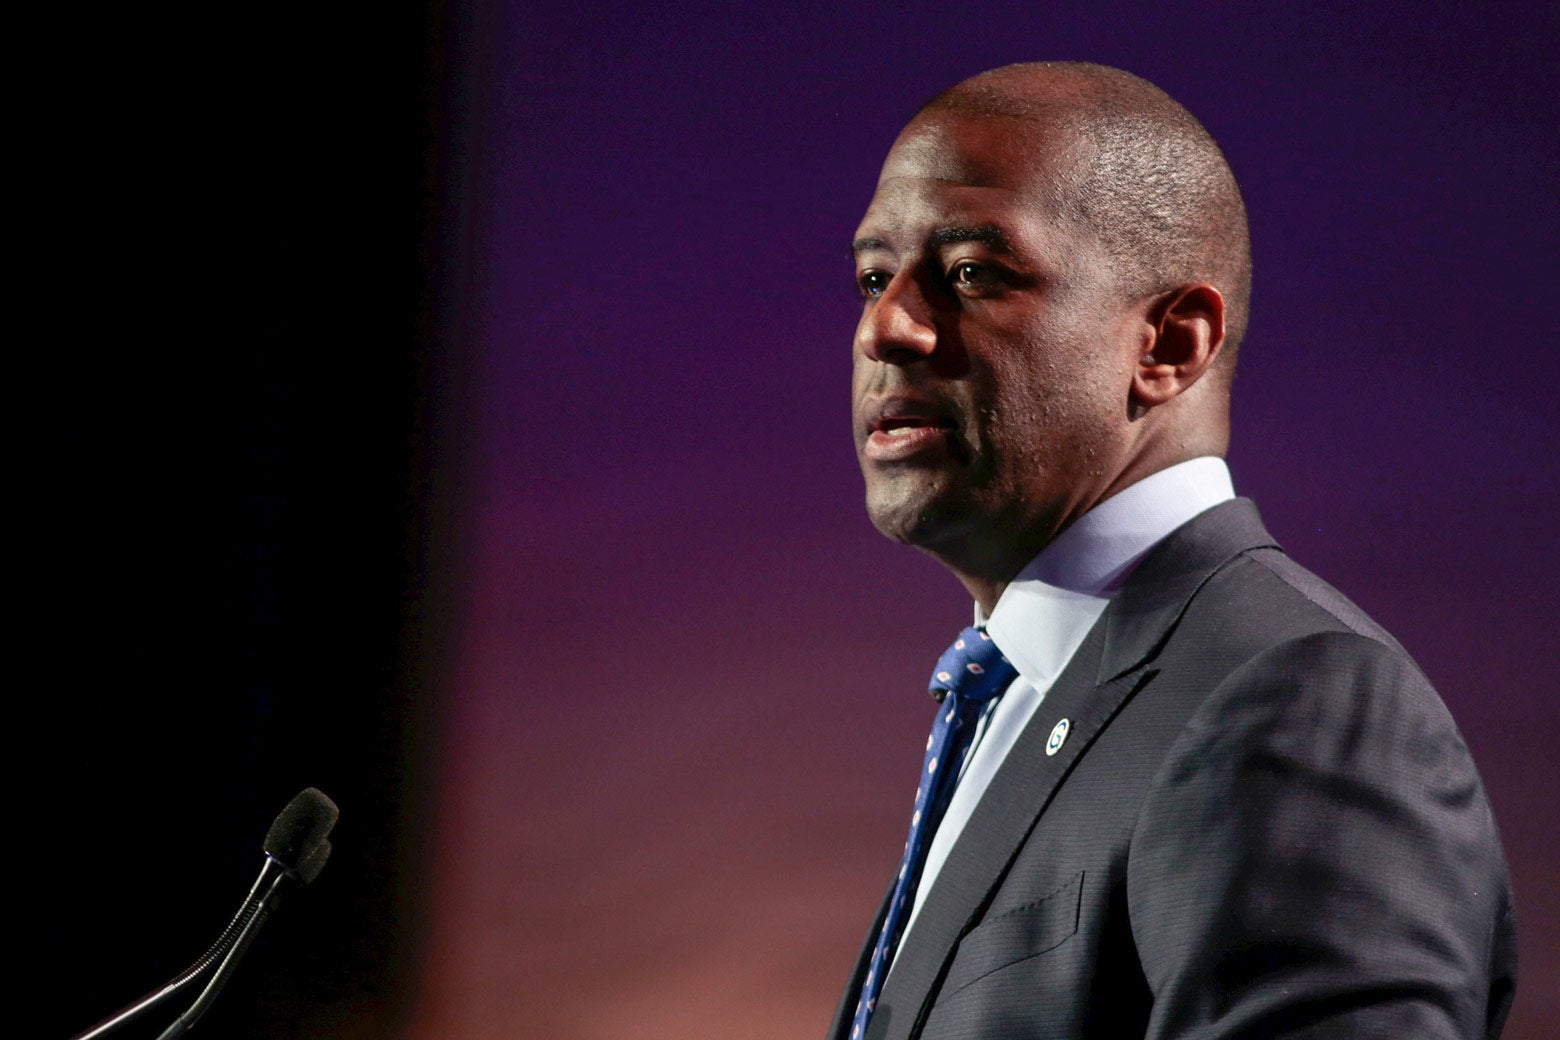 Andrew Gillum addresses the audience at he Netroots Nation annual conference for political progressives in Atlanta, Georgia on August 10, 2017.